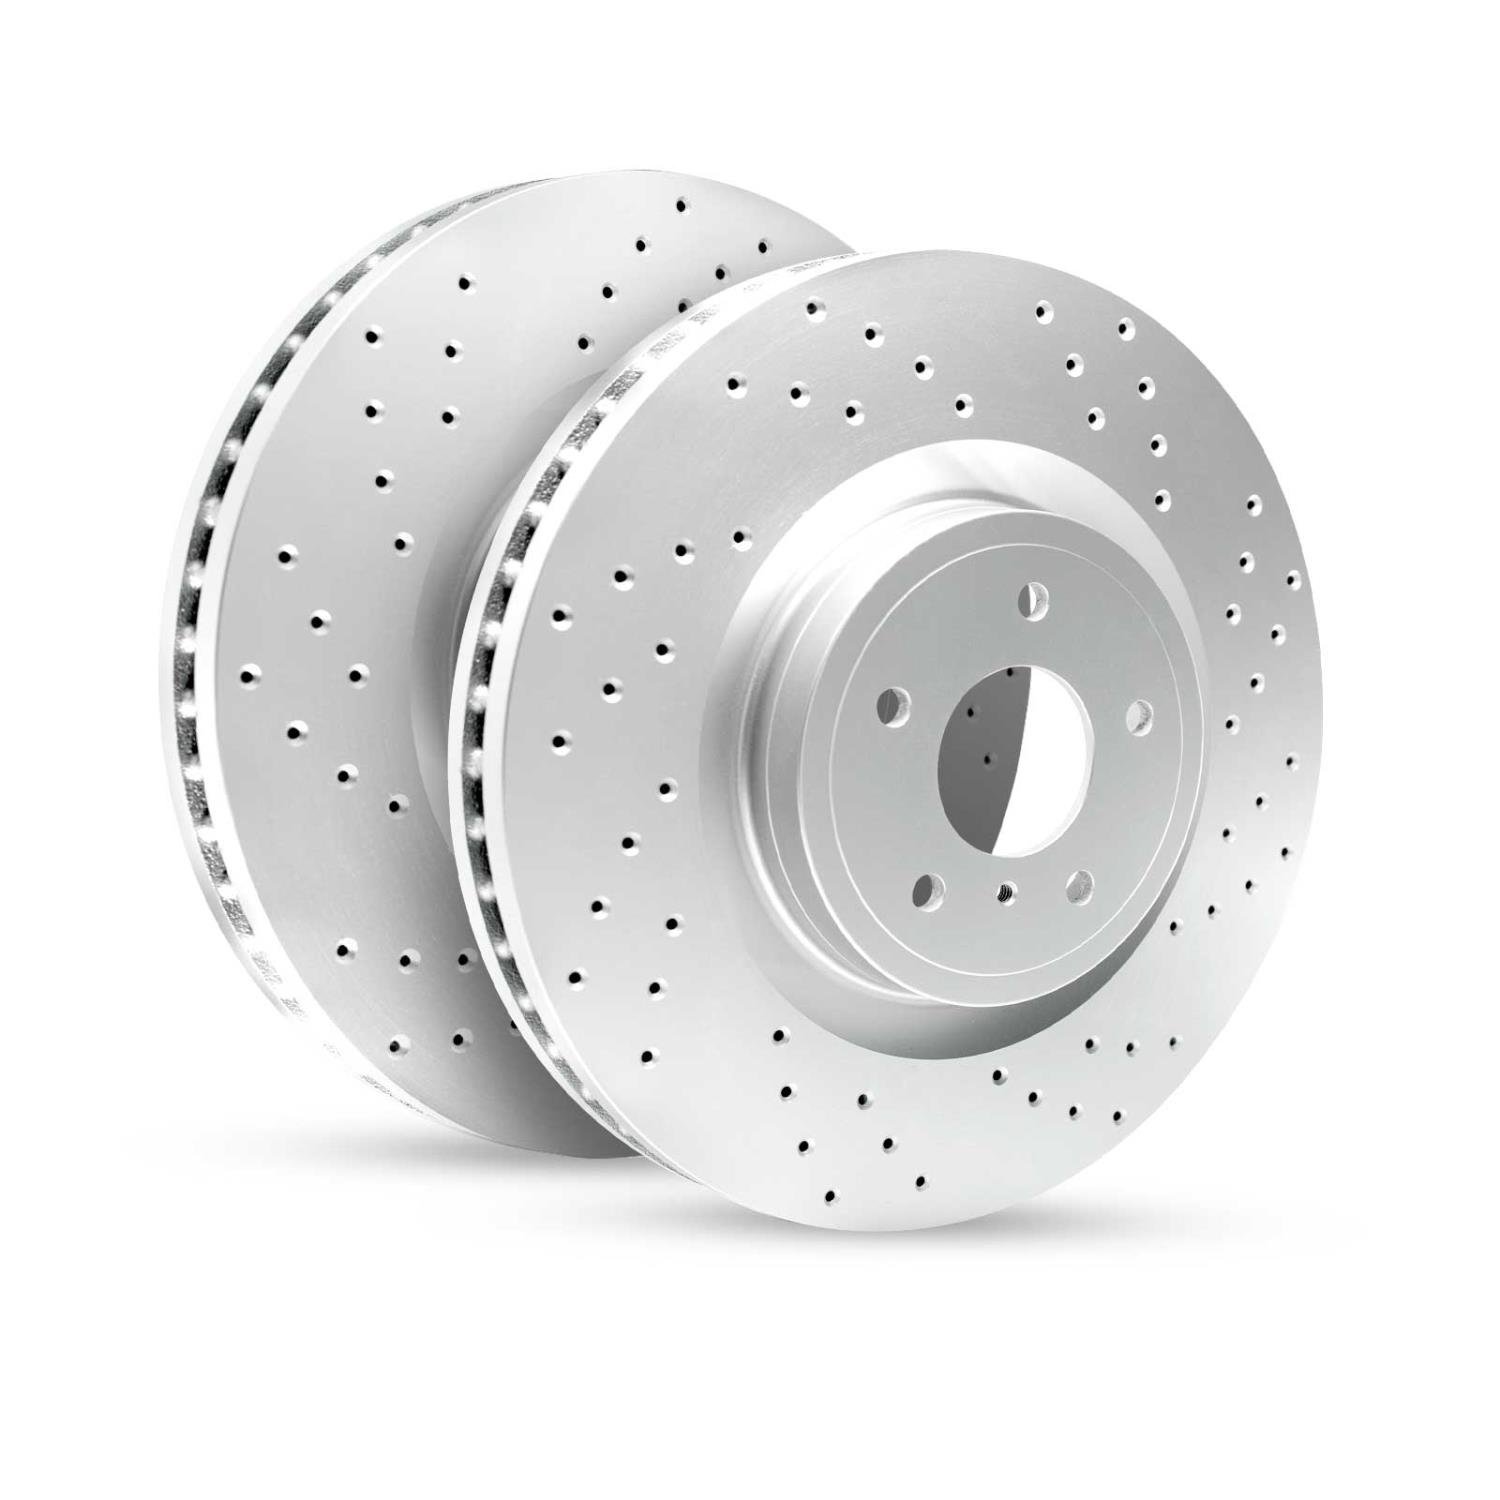 GEO-Carbon Drilled/Slotted Rotors, 1990-2006 Infiniti/Nissan, Position: Rear